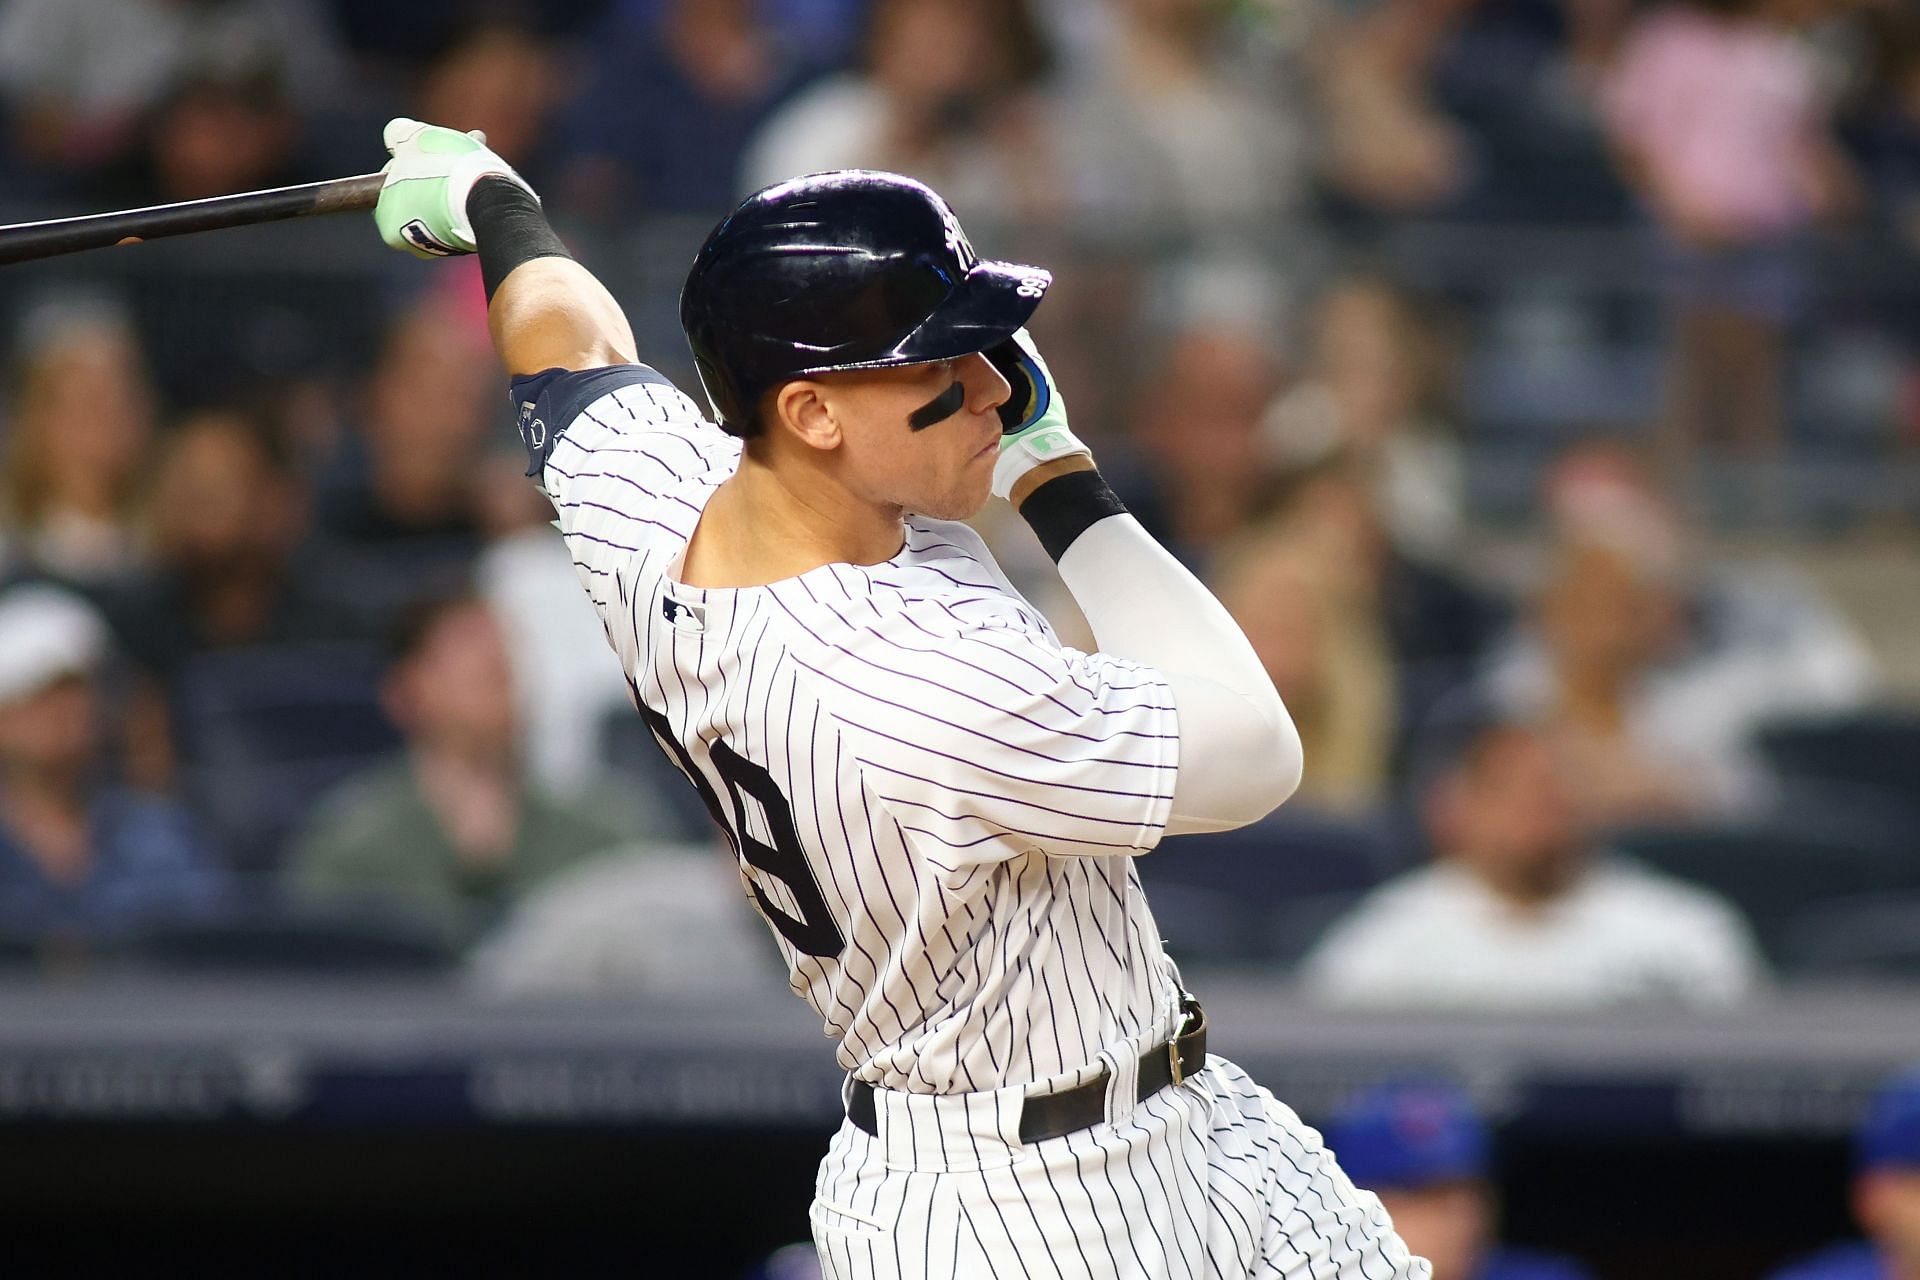 New York Yankees superstar Aaron Judge is an early MVP frontrunner with his white-hot form.